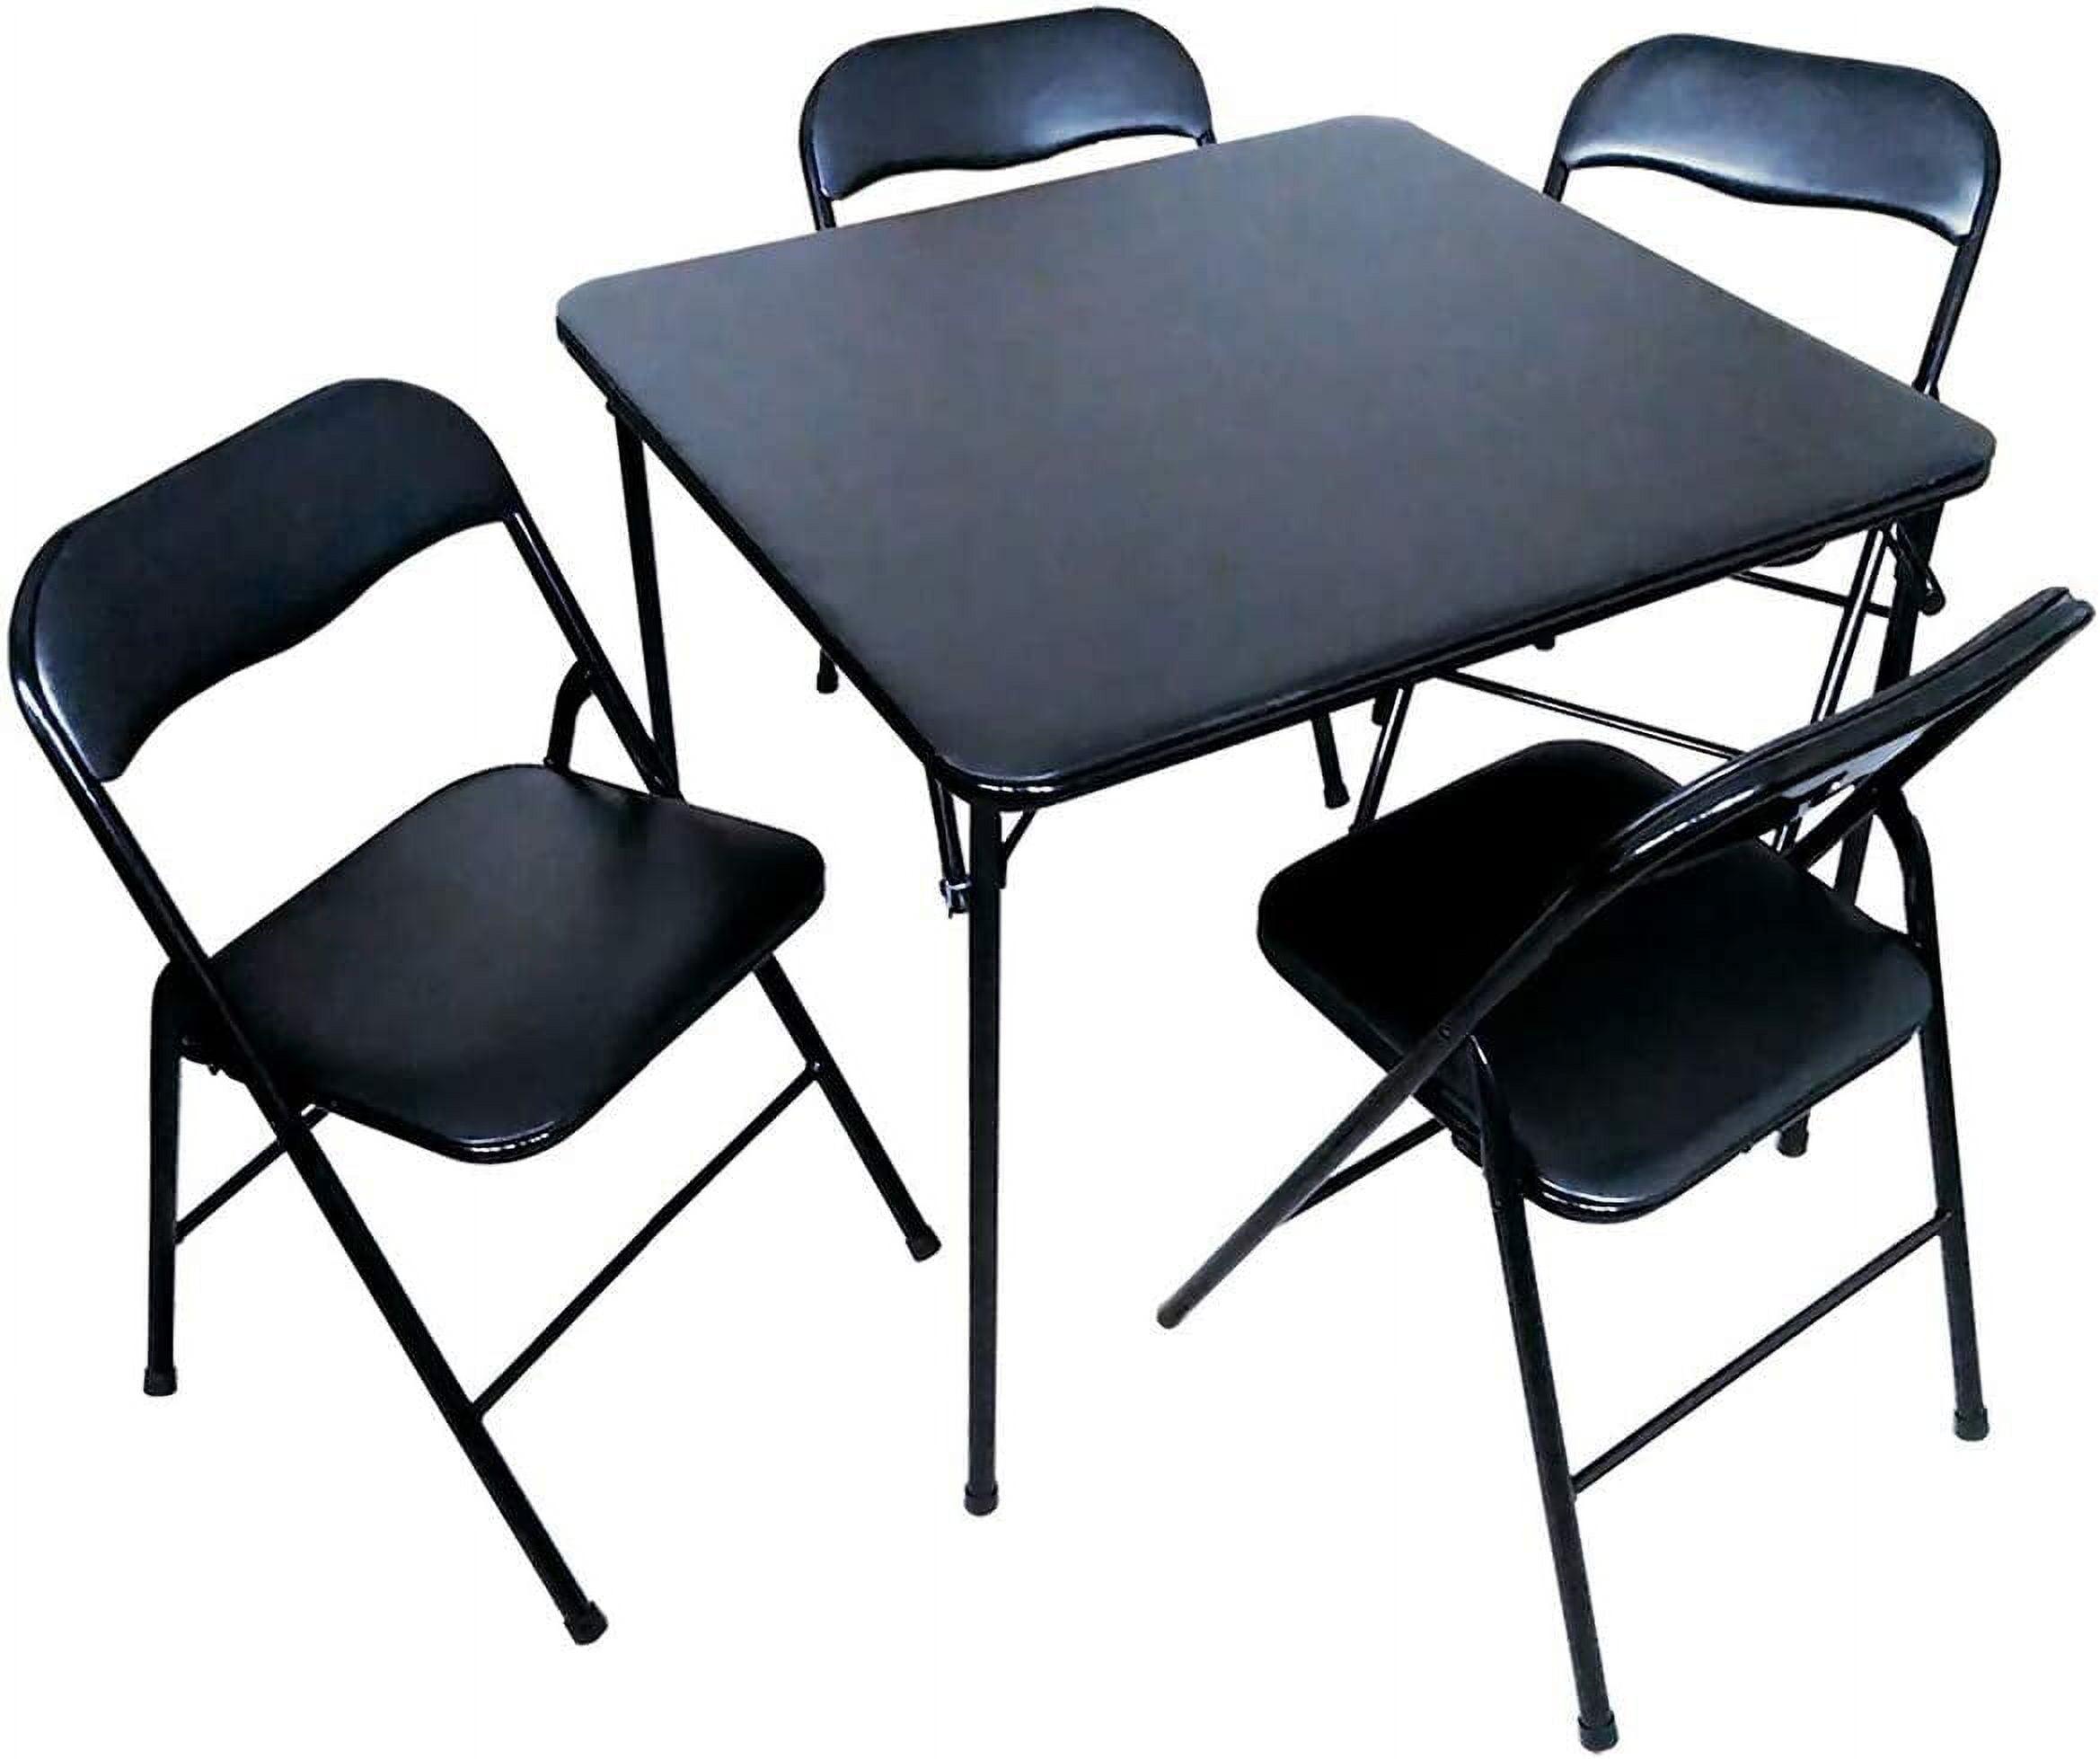 34" Square Black Folding Table & Chair Set with Padded Vinyl Cover